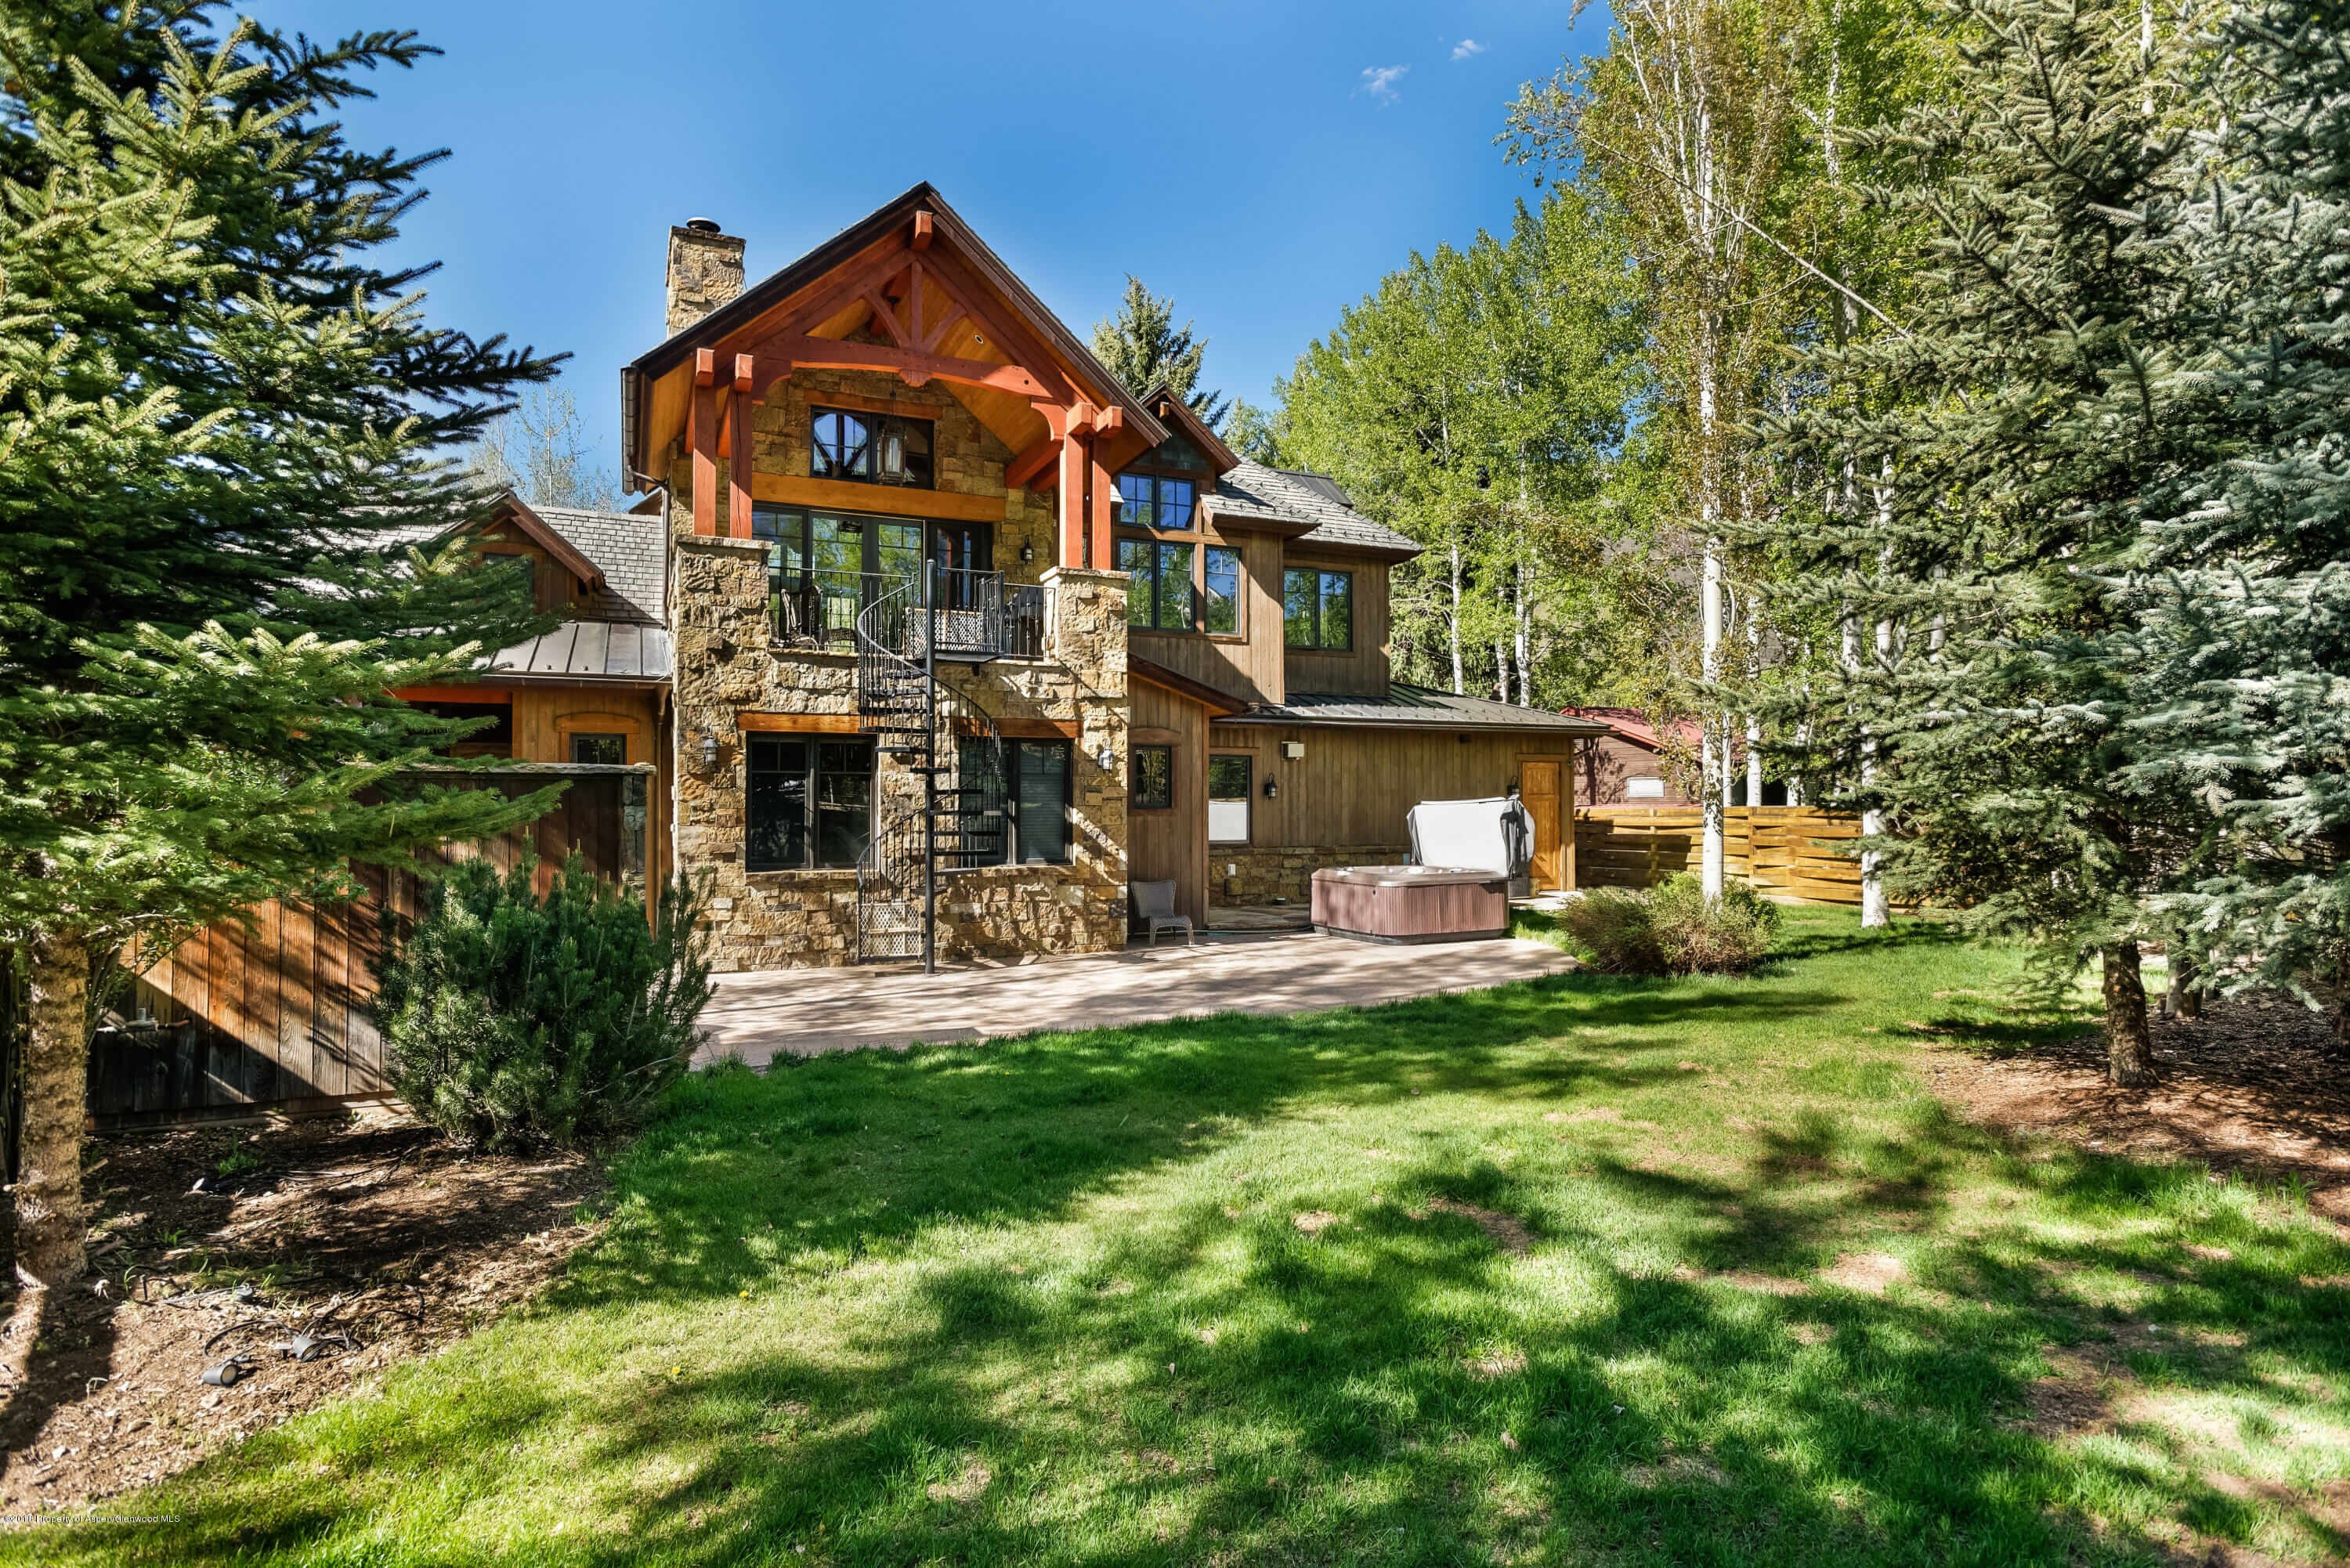 1395 Snowbunny Lane Aspen CO Home Sells in Deal Territory at $4.15M/$873 sq ft Image